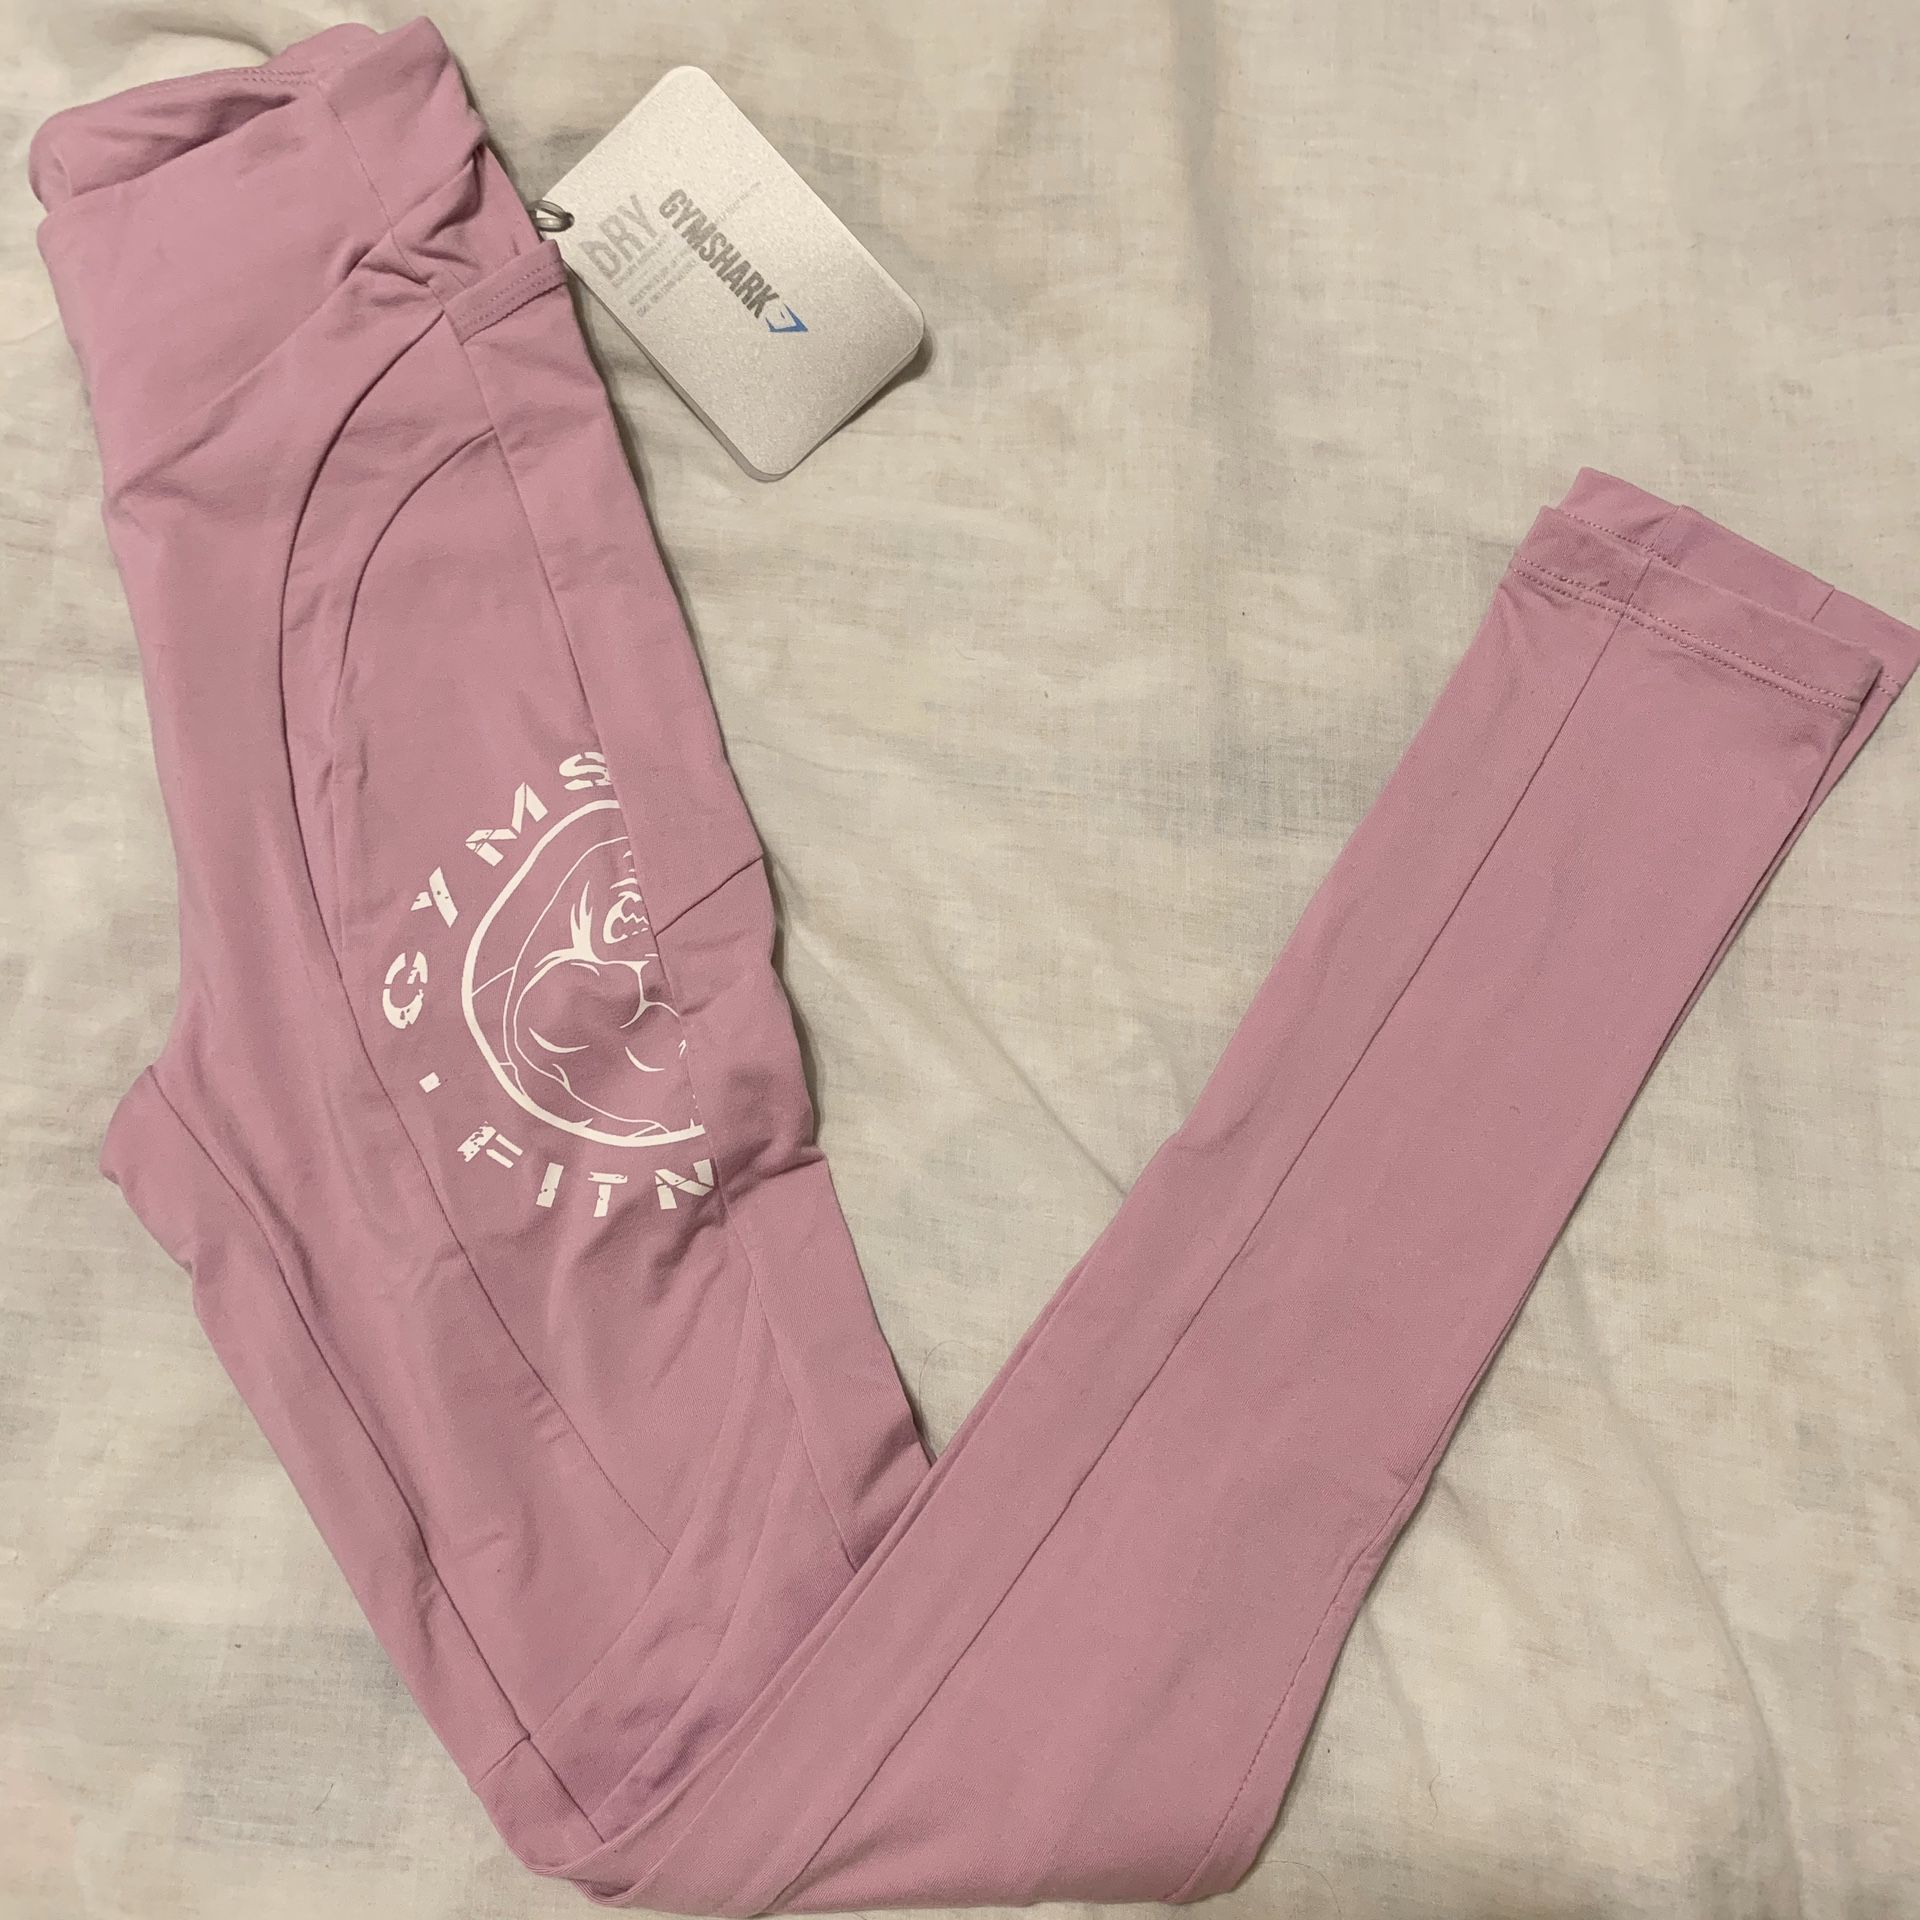 Gymshark athletic pants with original tags attached